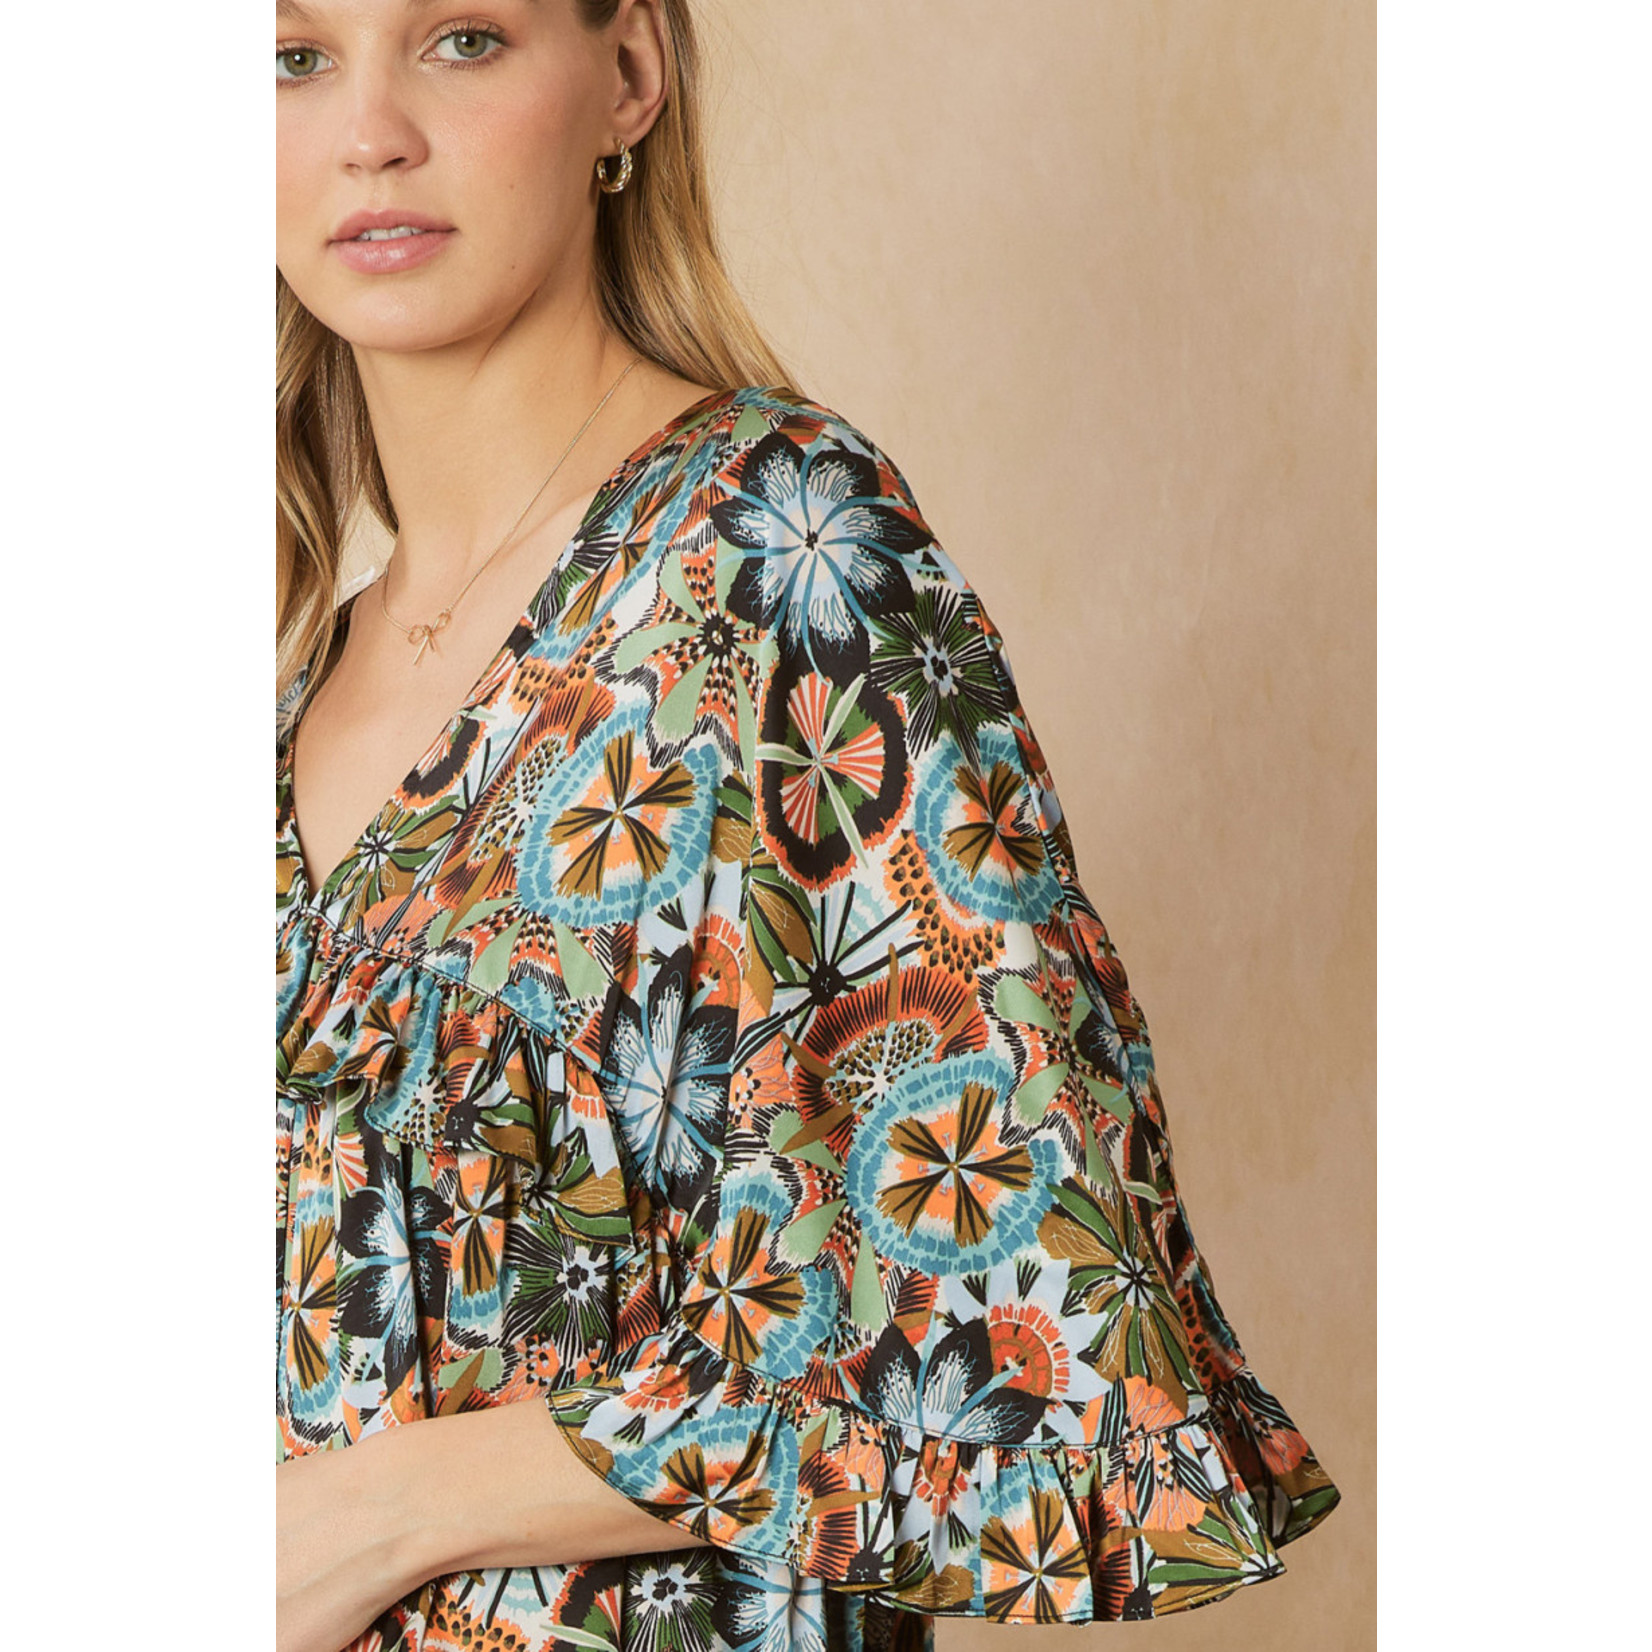 The Donna Floral Print Top